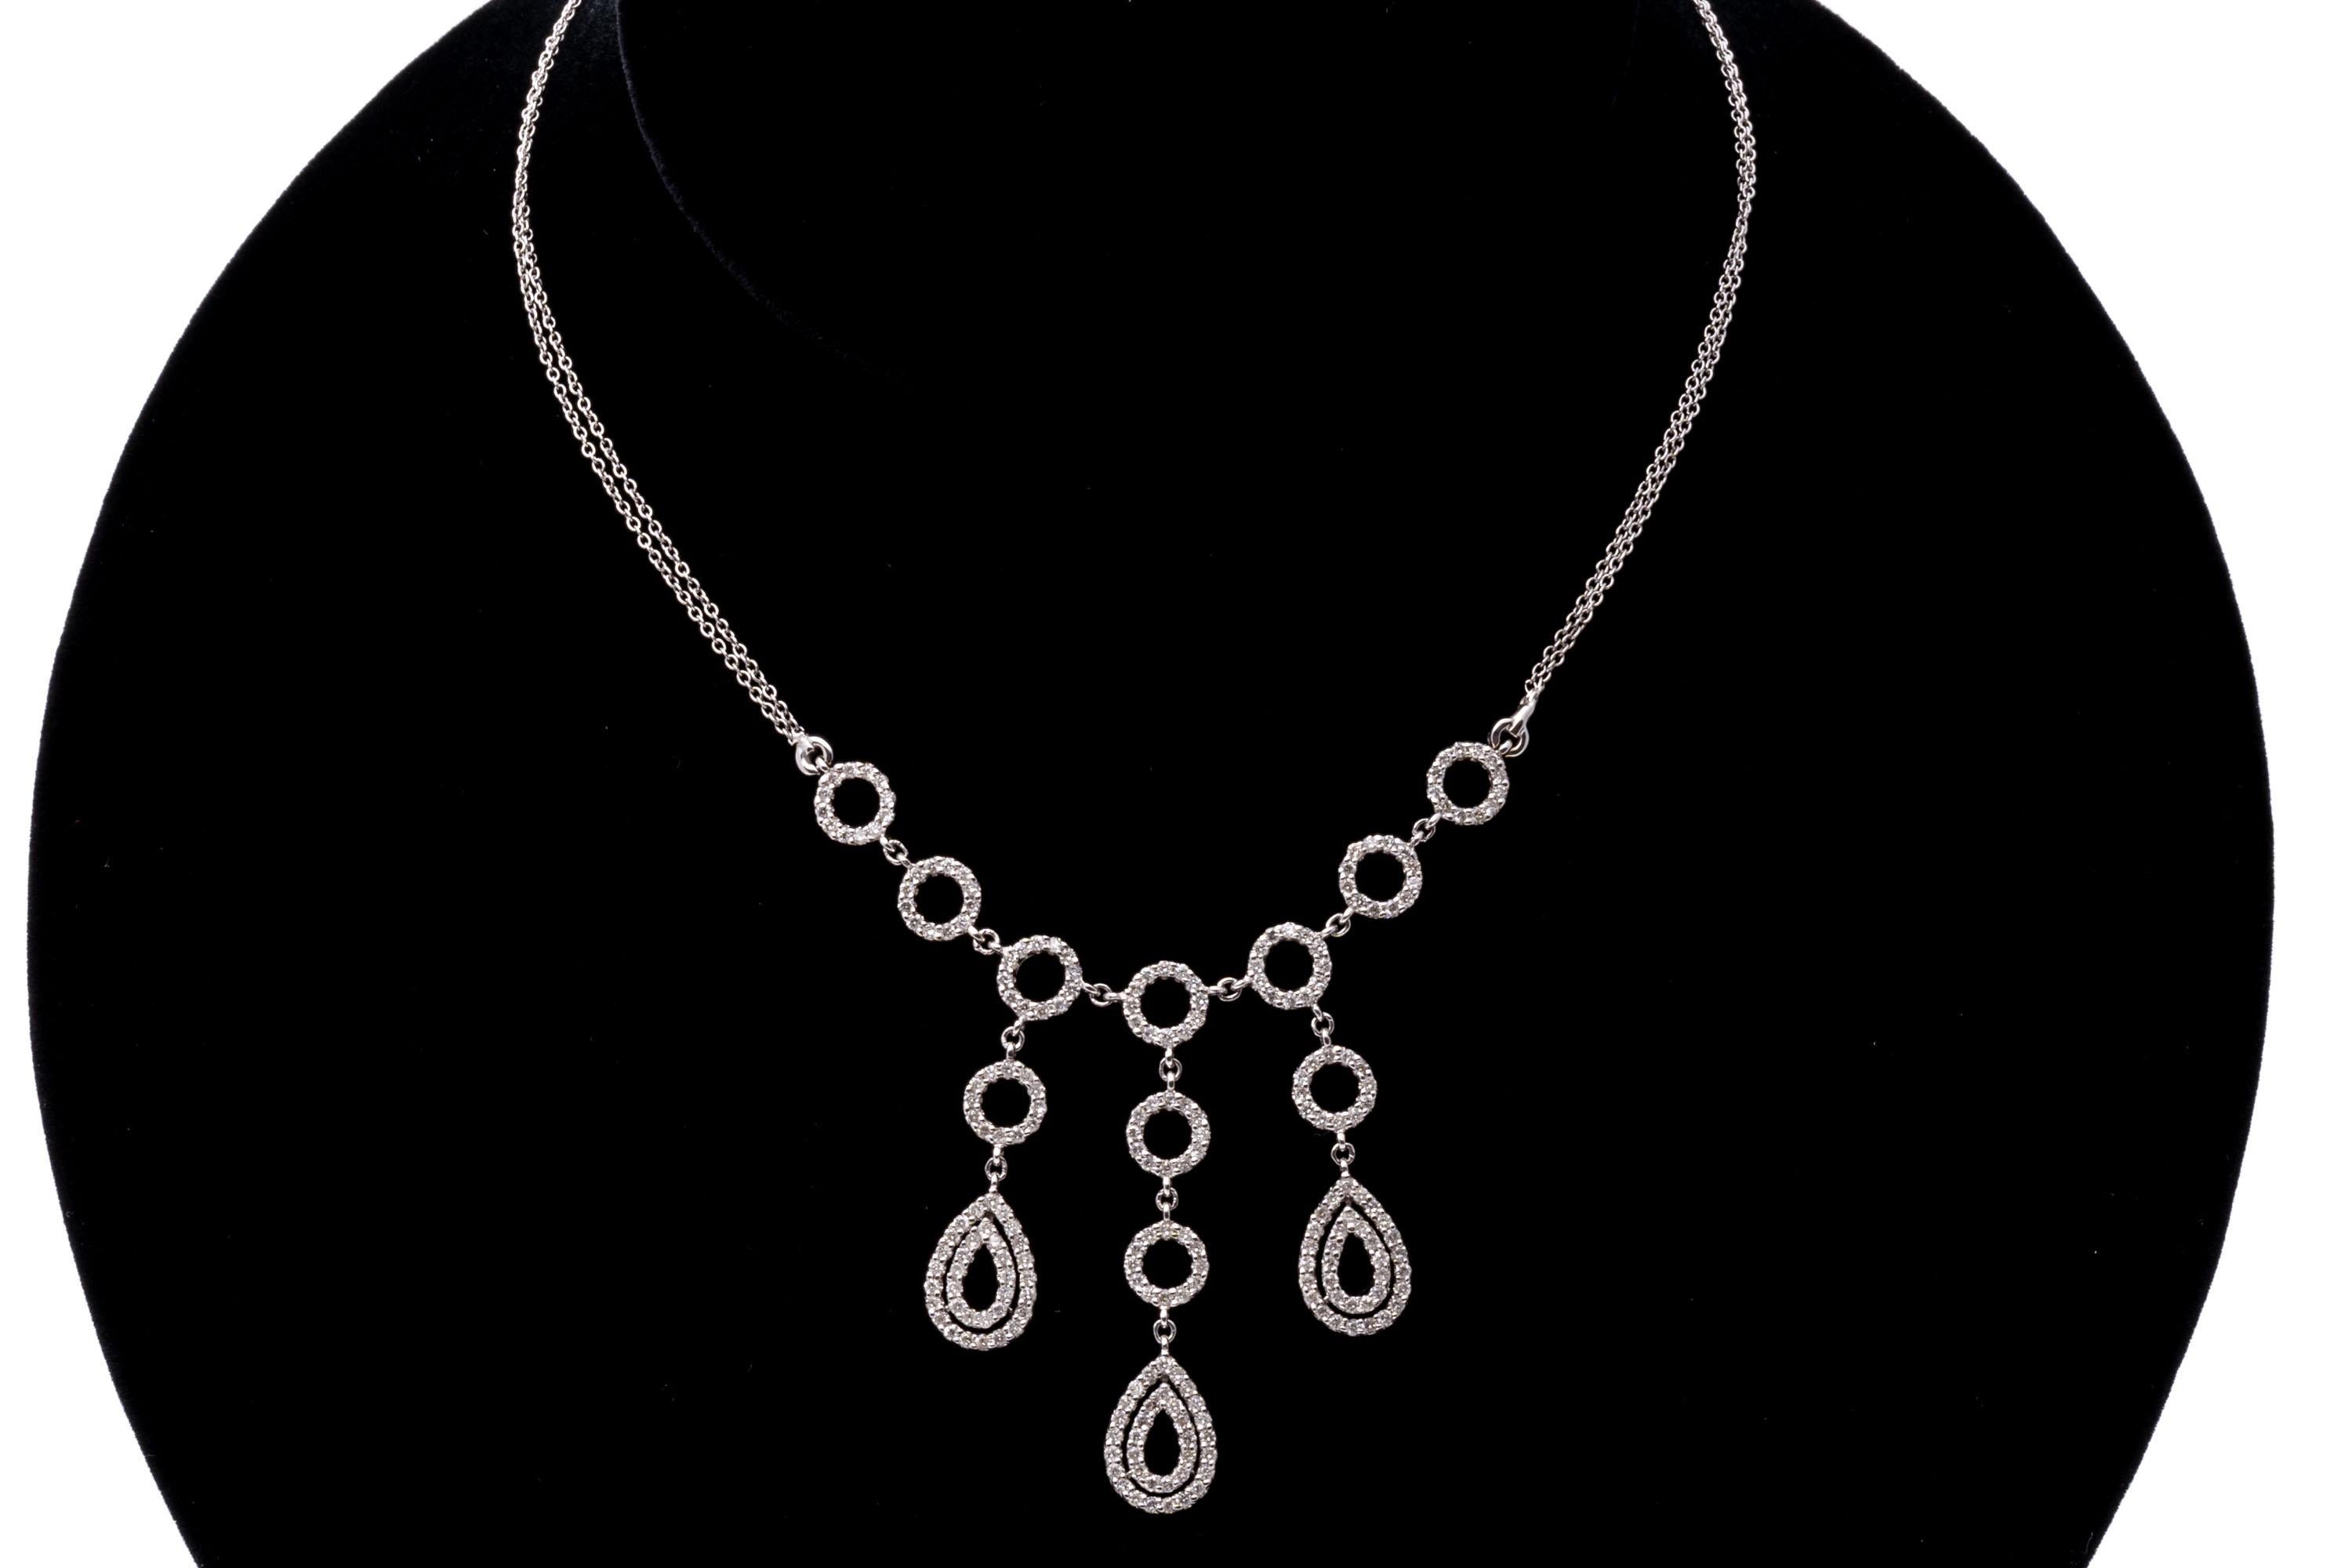 14k white gold necklace. This striking necklace contains seven open circles, set with round faceted diamonds, from which hang three drops of open circles, also set with round faceted diamonds, from which dangle open pear shaped drops, set with round